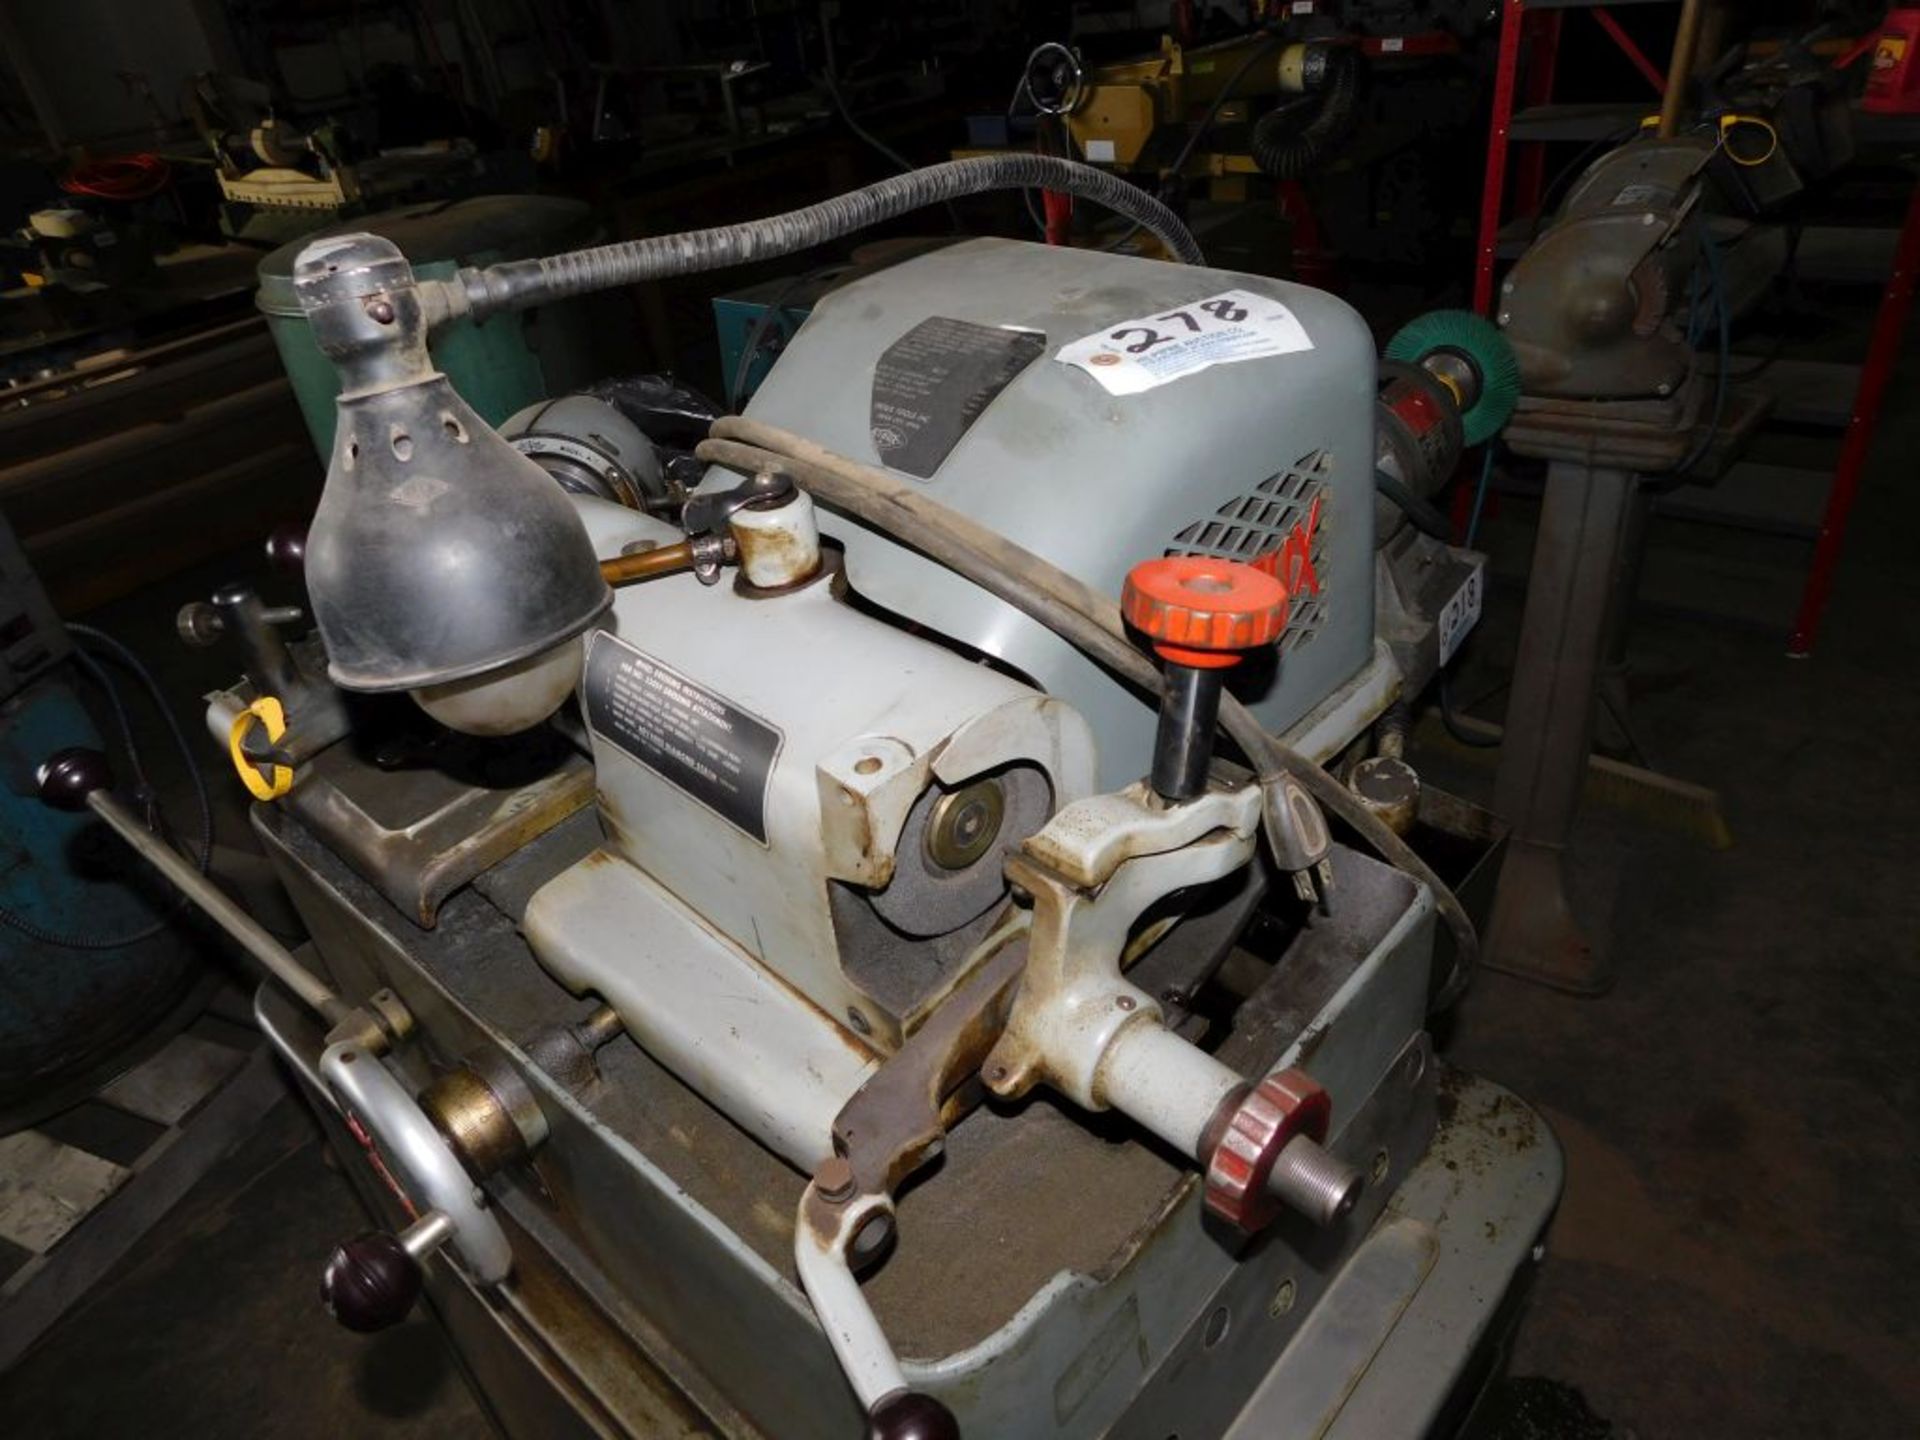 Sioux valve face grinding machine, model 645L, sn 62317, 115 volt. - Image 5 of 6